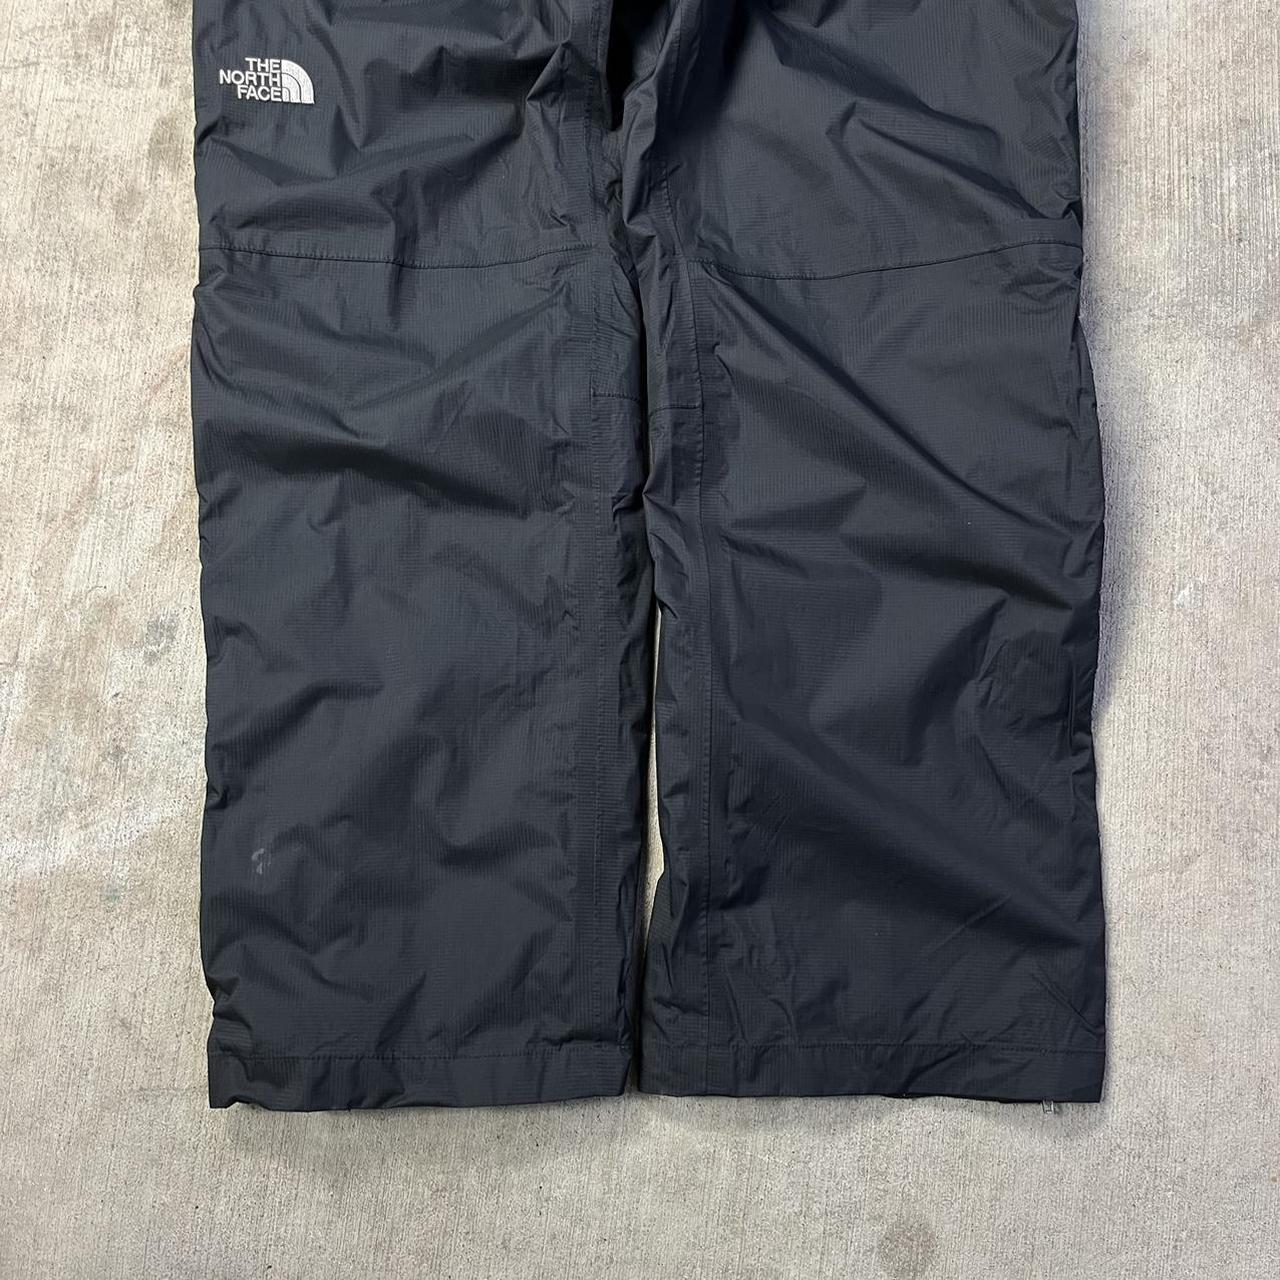 The North Face Hyvent DT Pants •Mens XL (see... - Depop